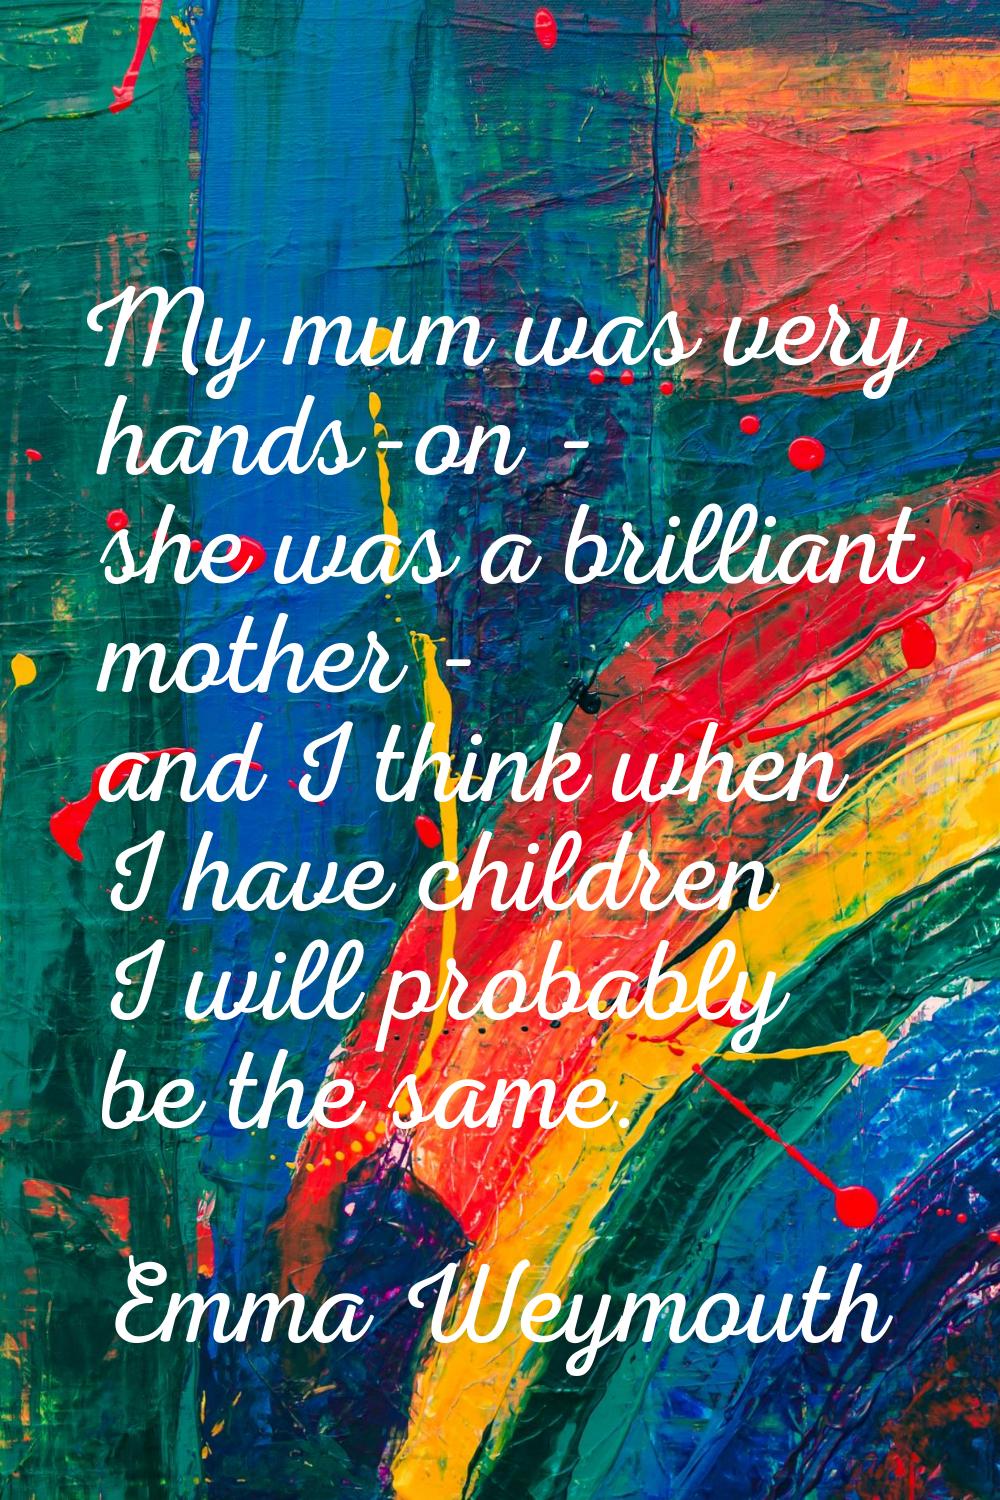 My mum was very hands-on - she was a brilliant mother - and I think when I have children I will pro